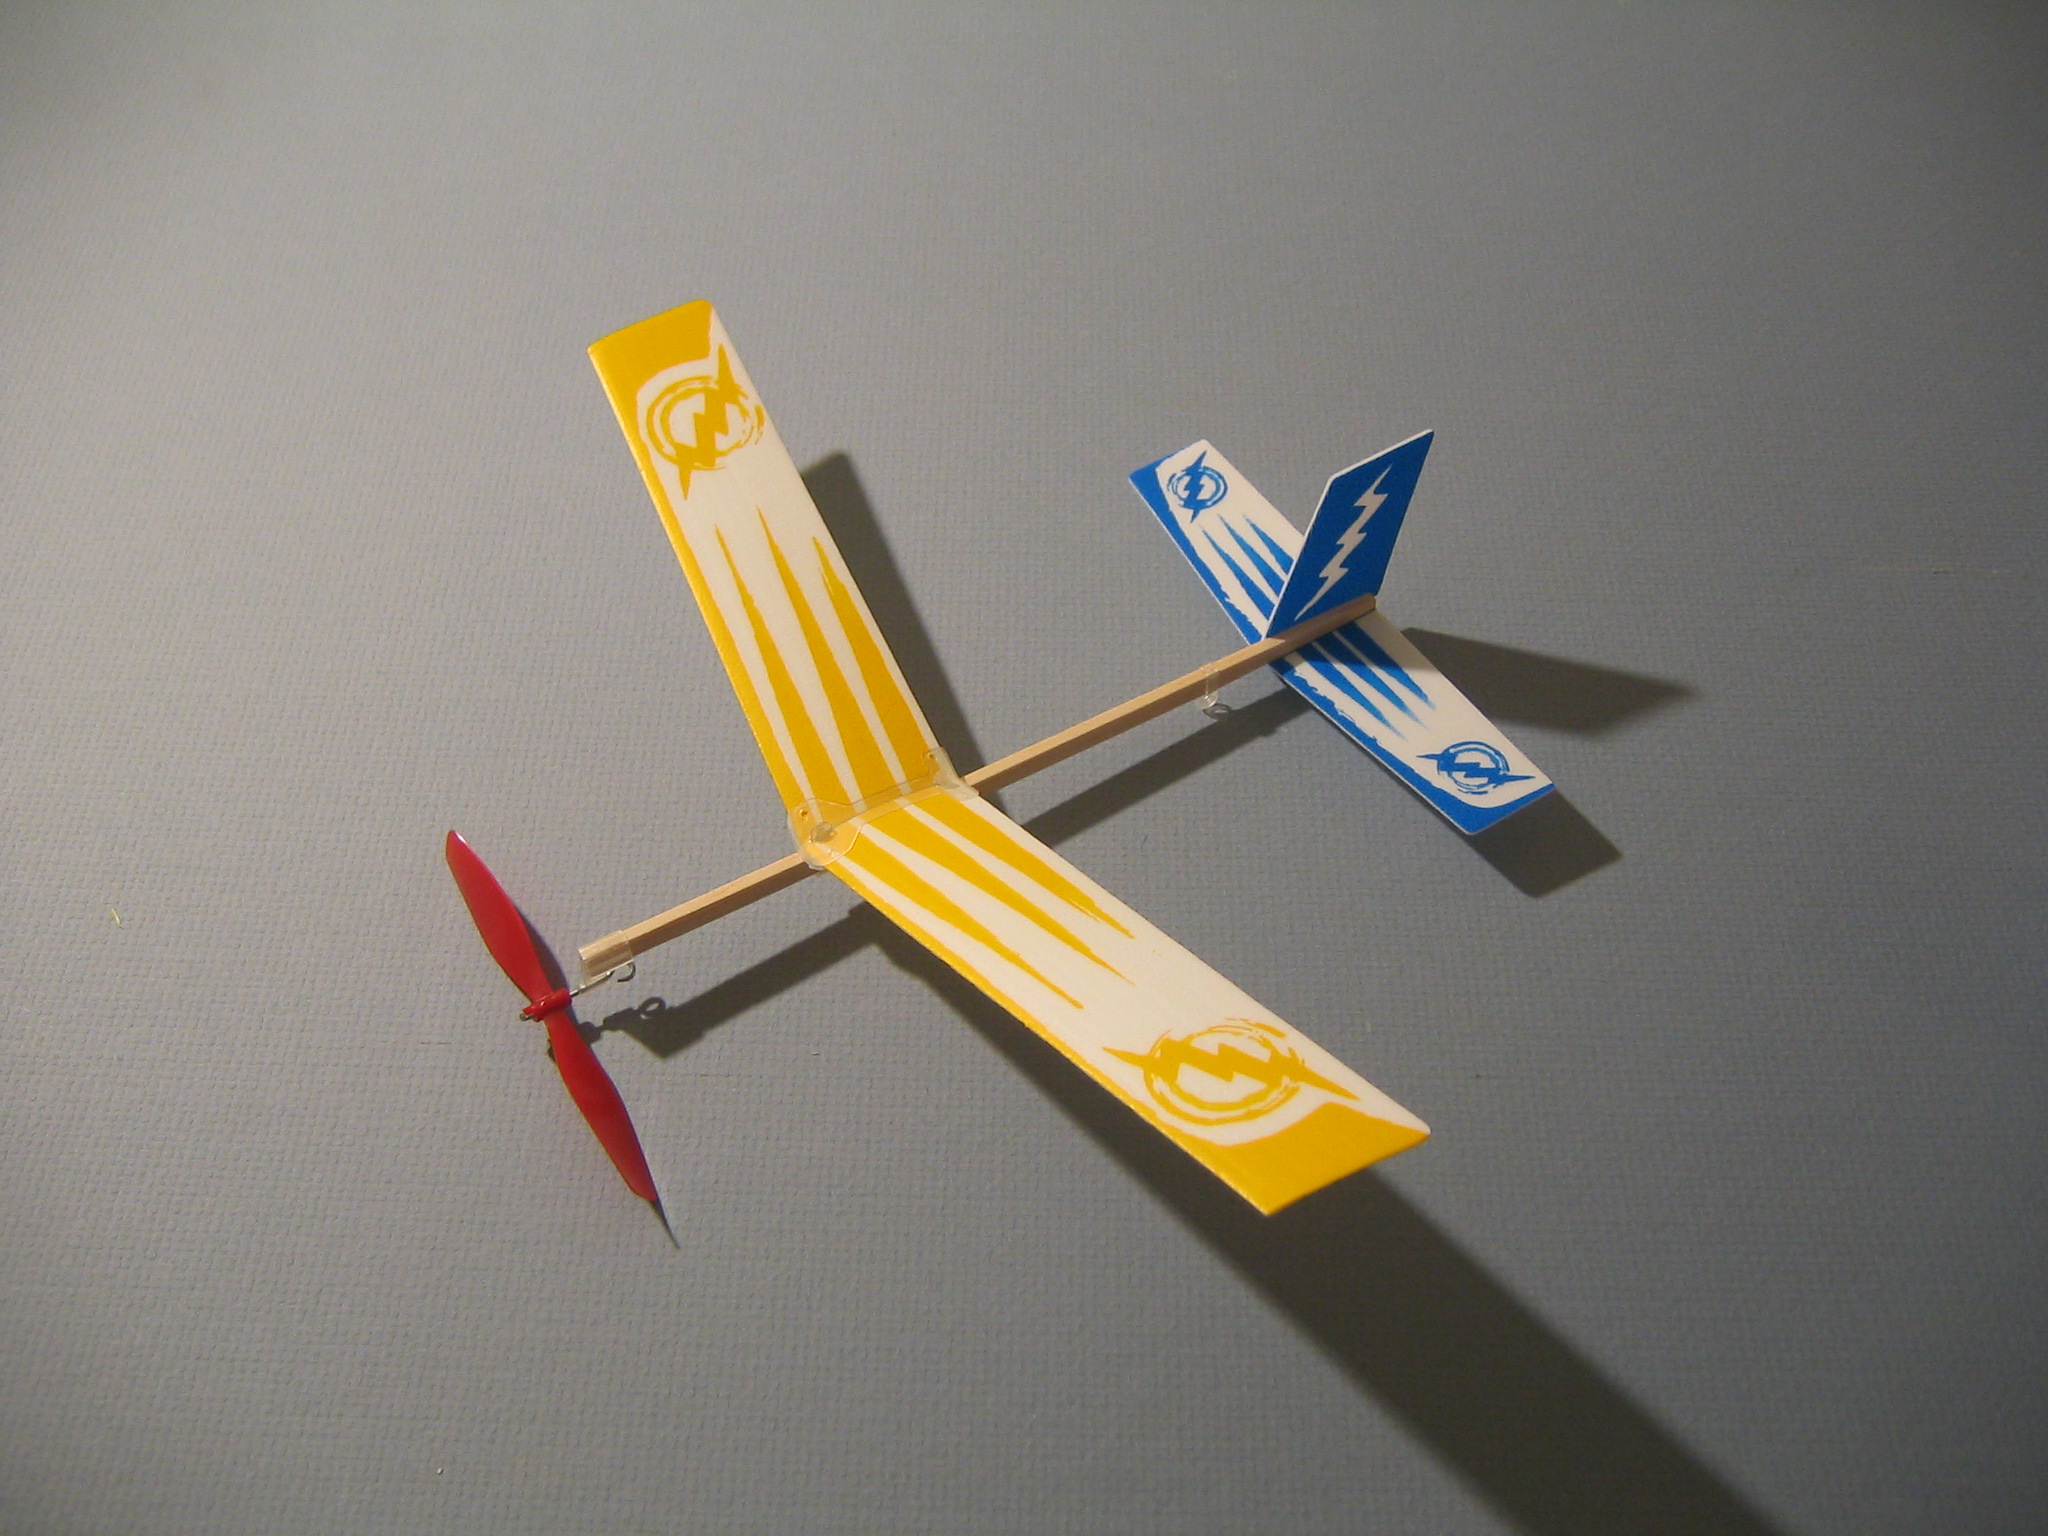 Flying Jet Airplane 1960’s Rubber Band Launched ~ Dime Store Display Card of 24 